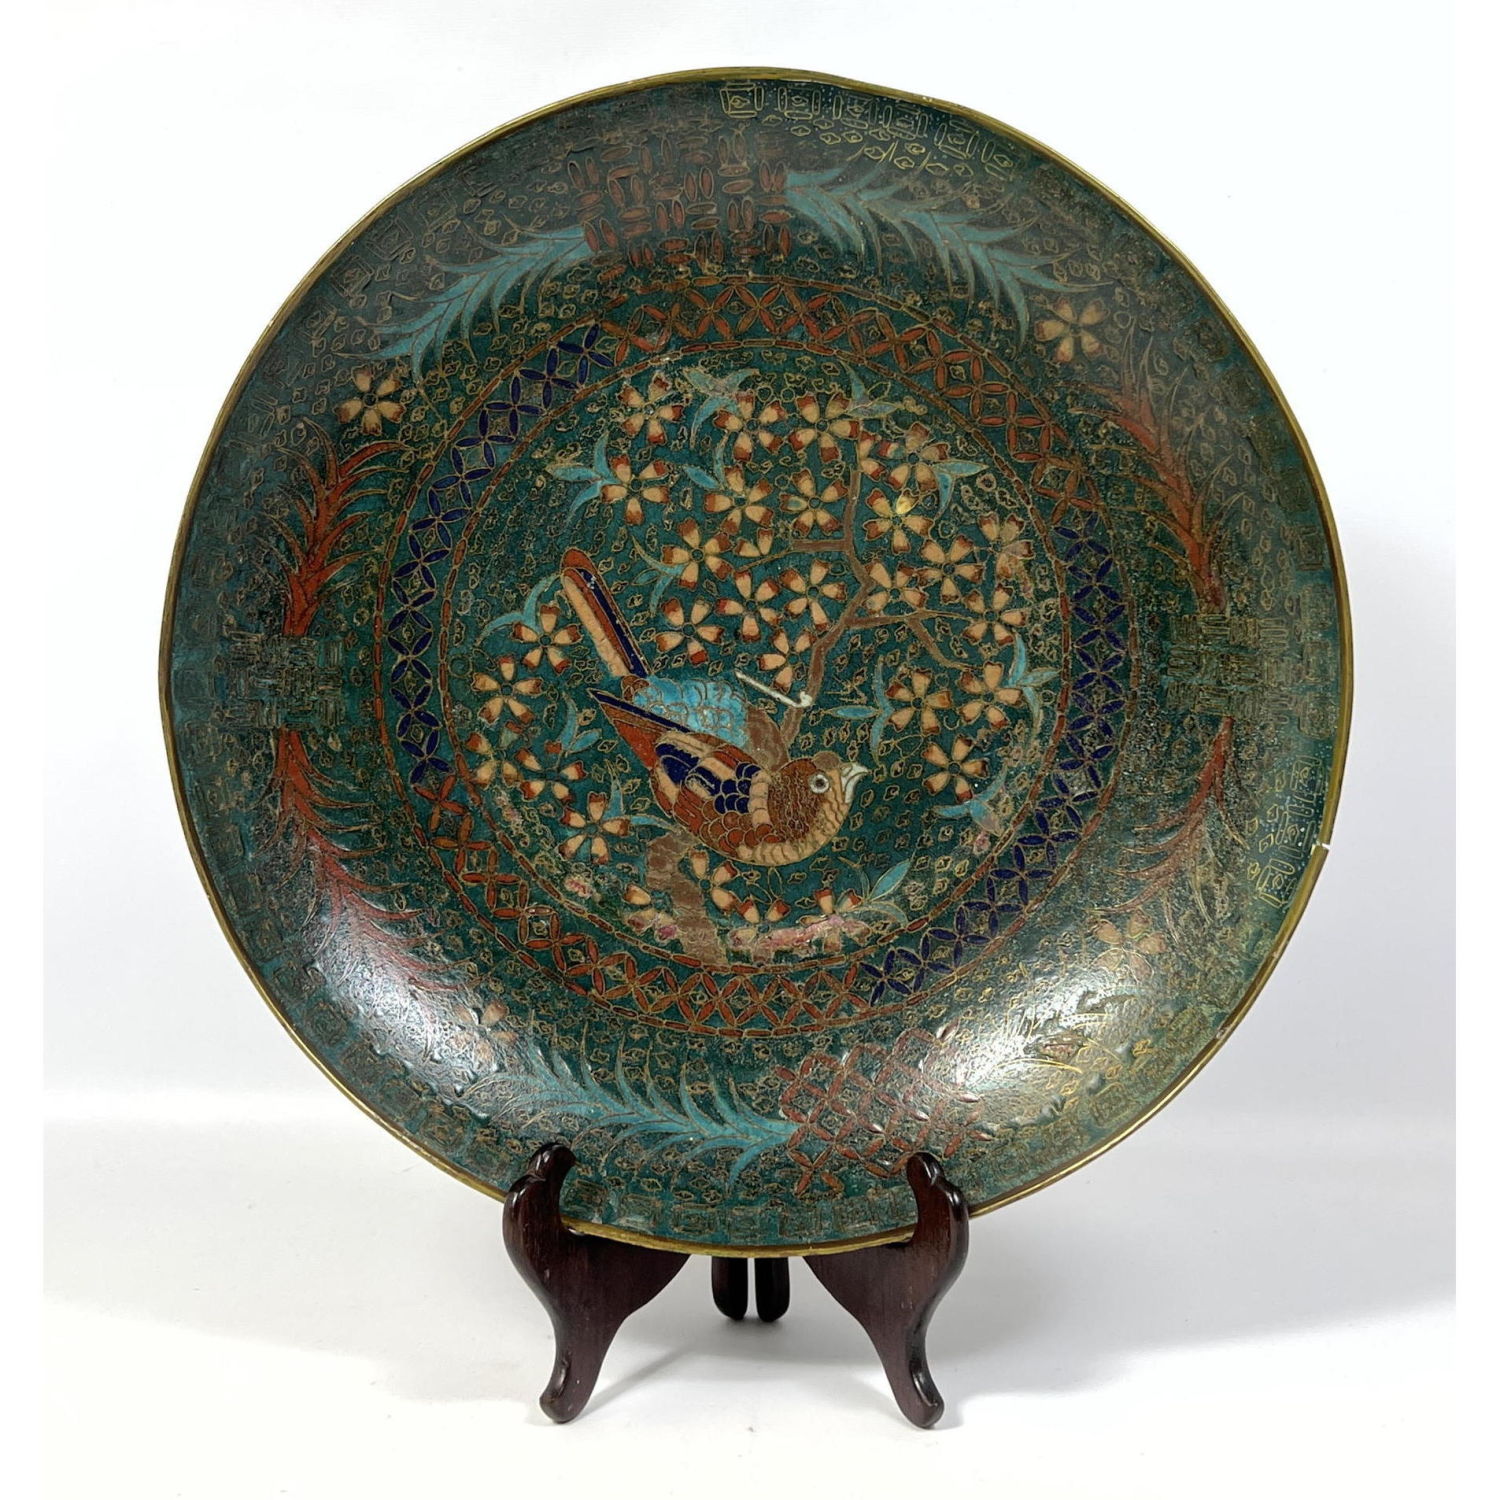 Older Cloisonne charger bird and